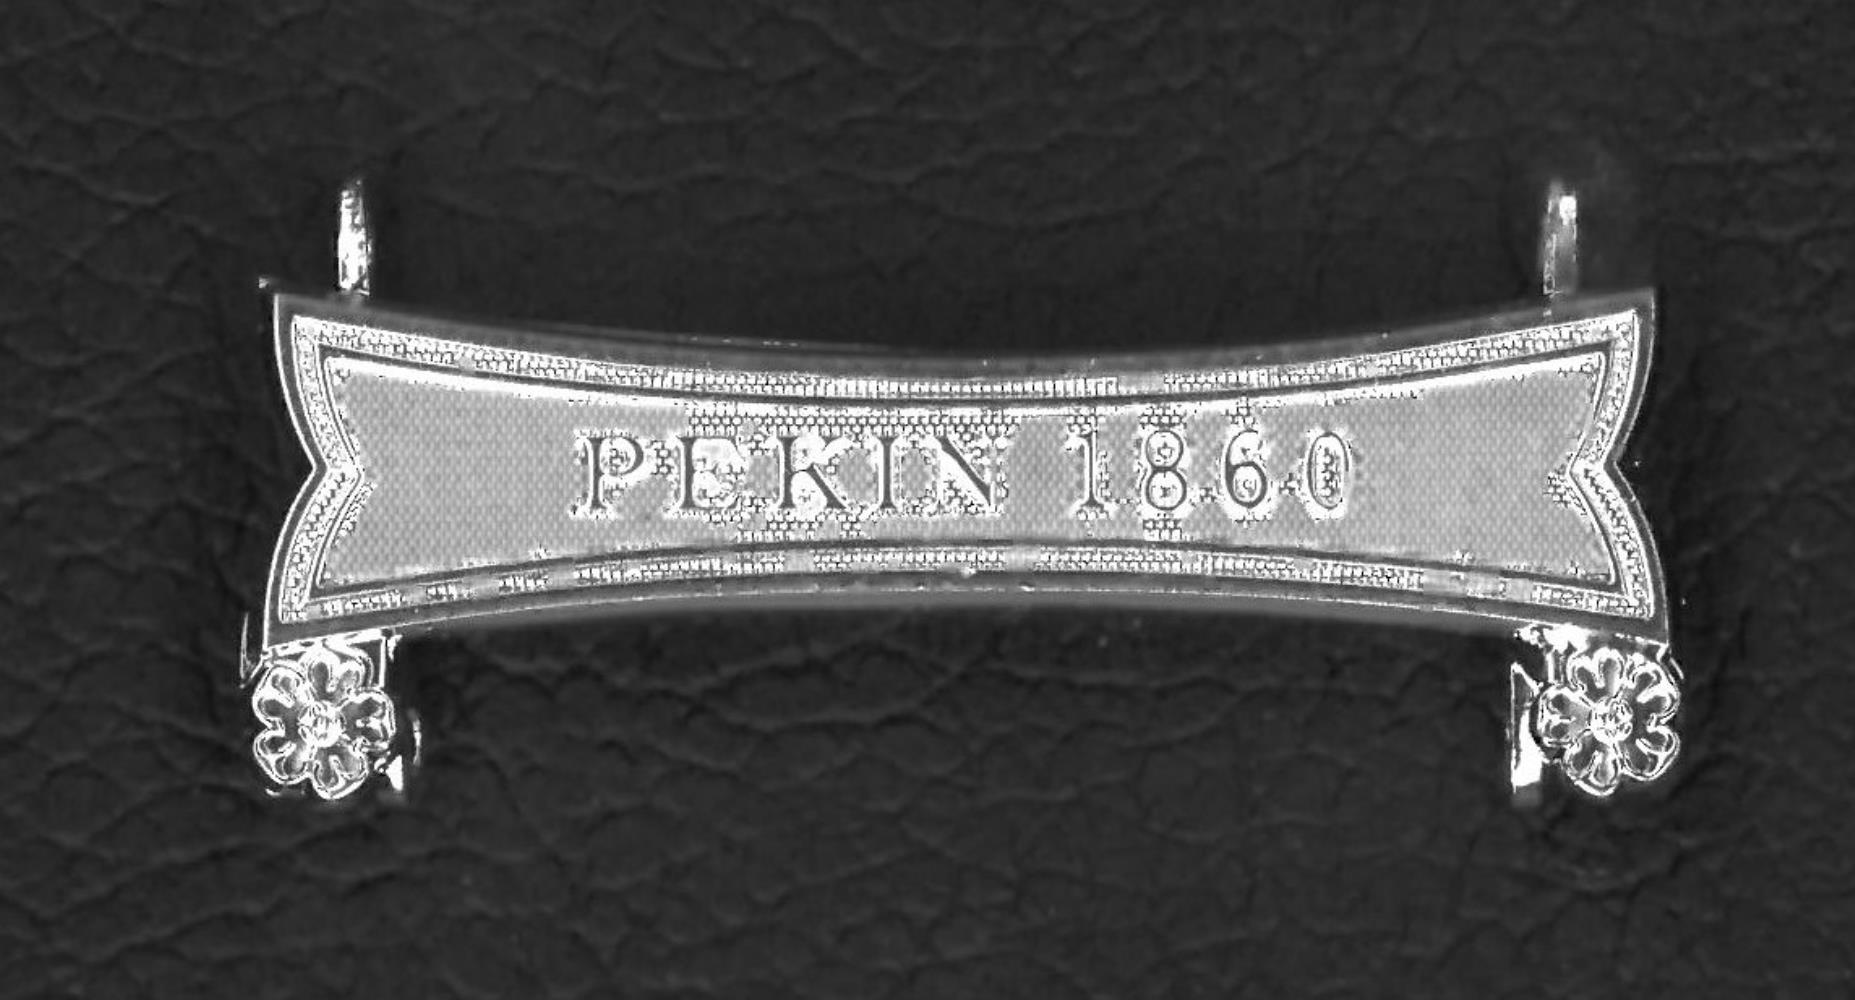 Worcestershire Medal Service: Clasp - Pekin 1860 (Second China War)